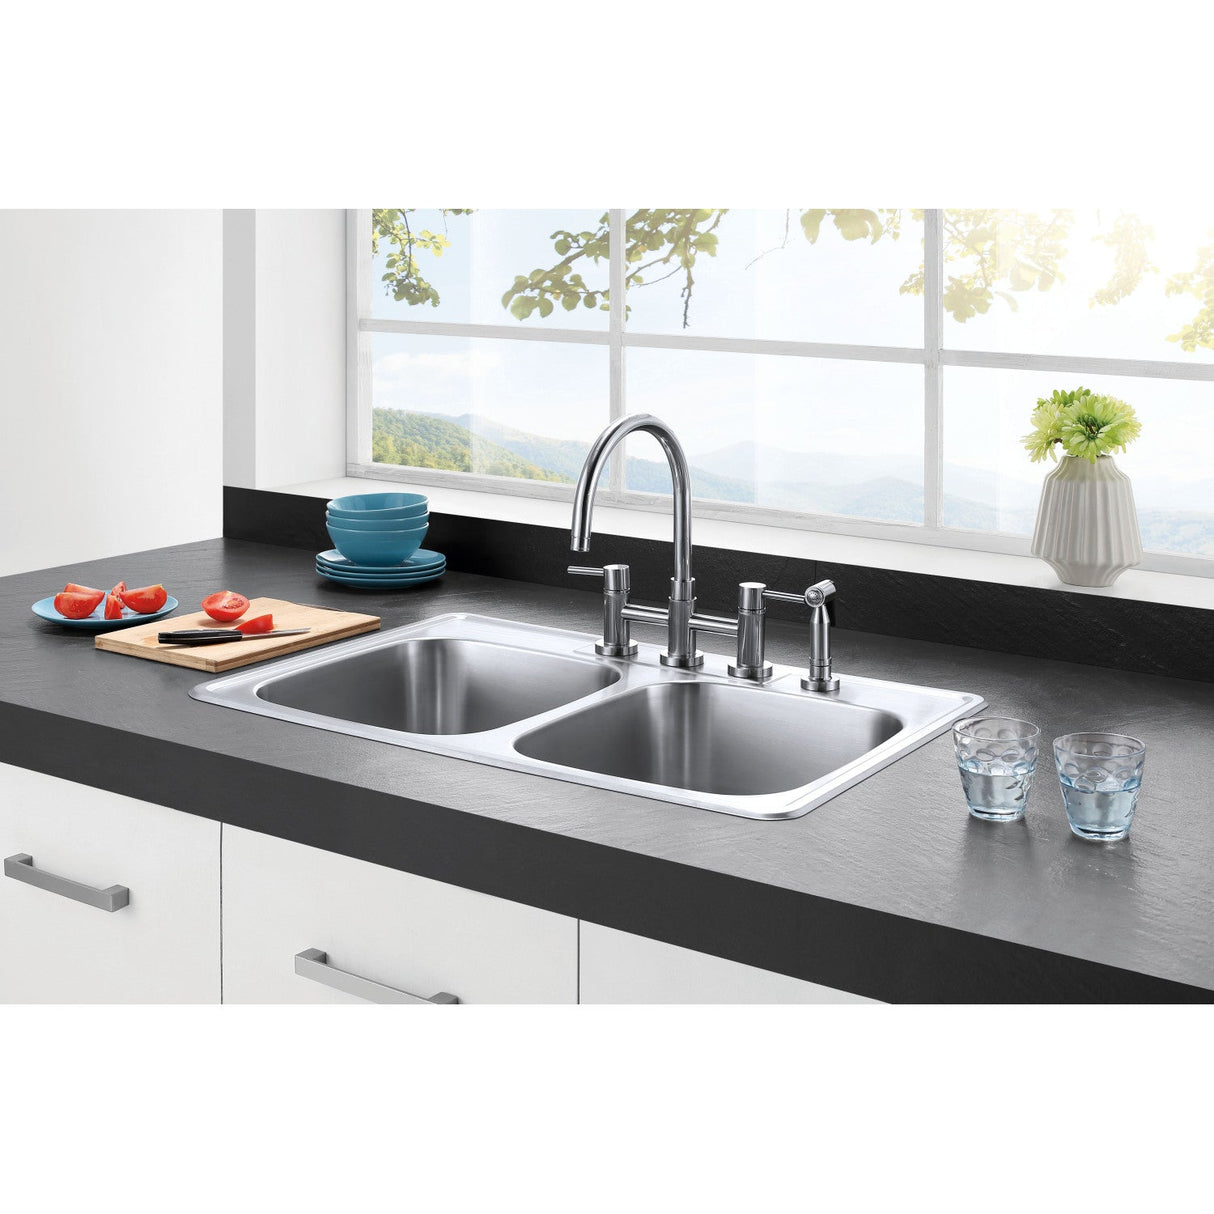 Studio GKTD33226 33-Inch Stainless Steel Self-Rimming 4-Hole Double Bowl Drop-In Kitchen Sink, Brushed